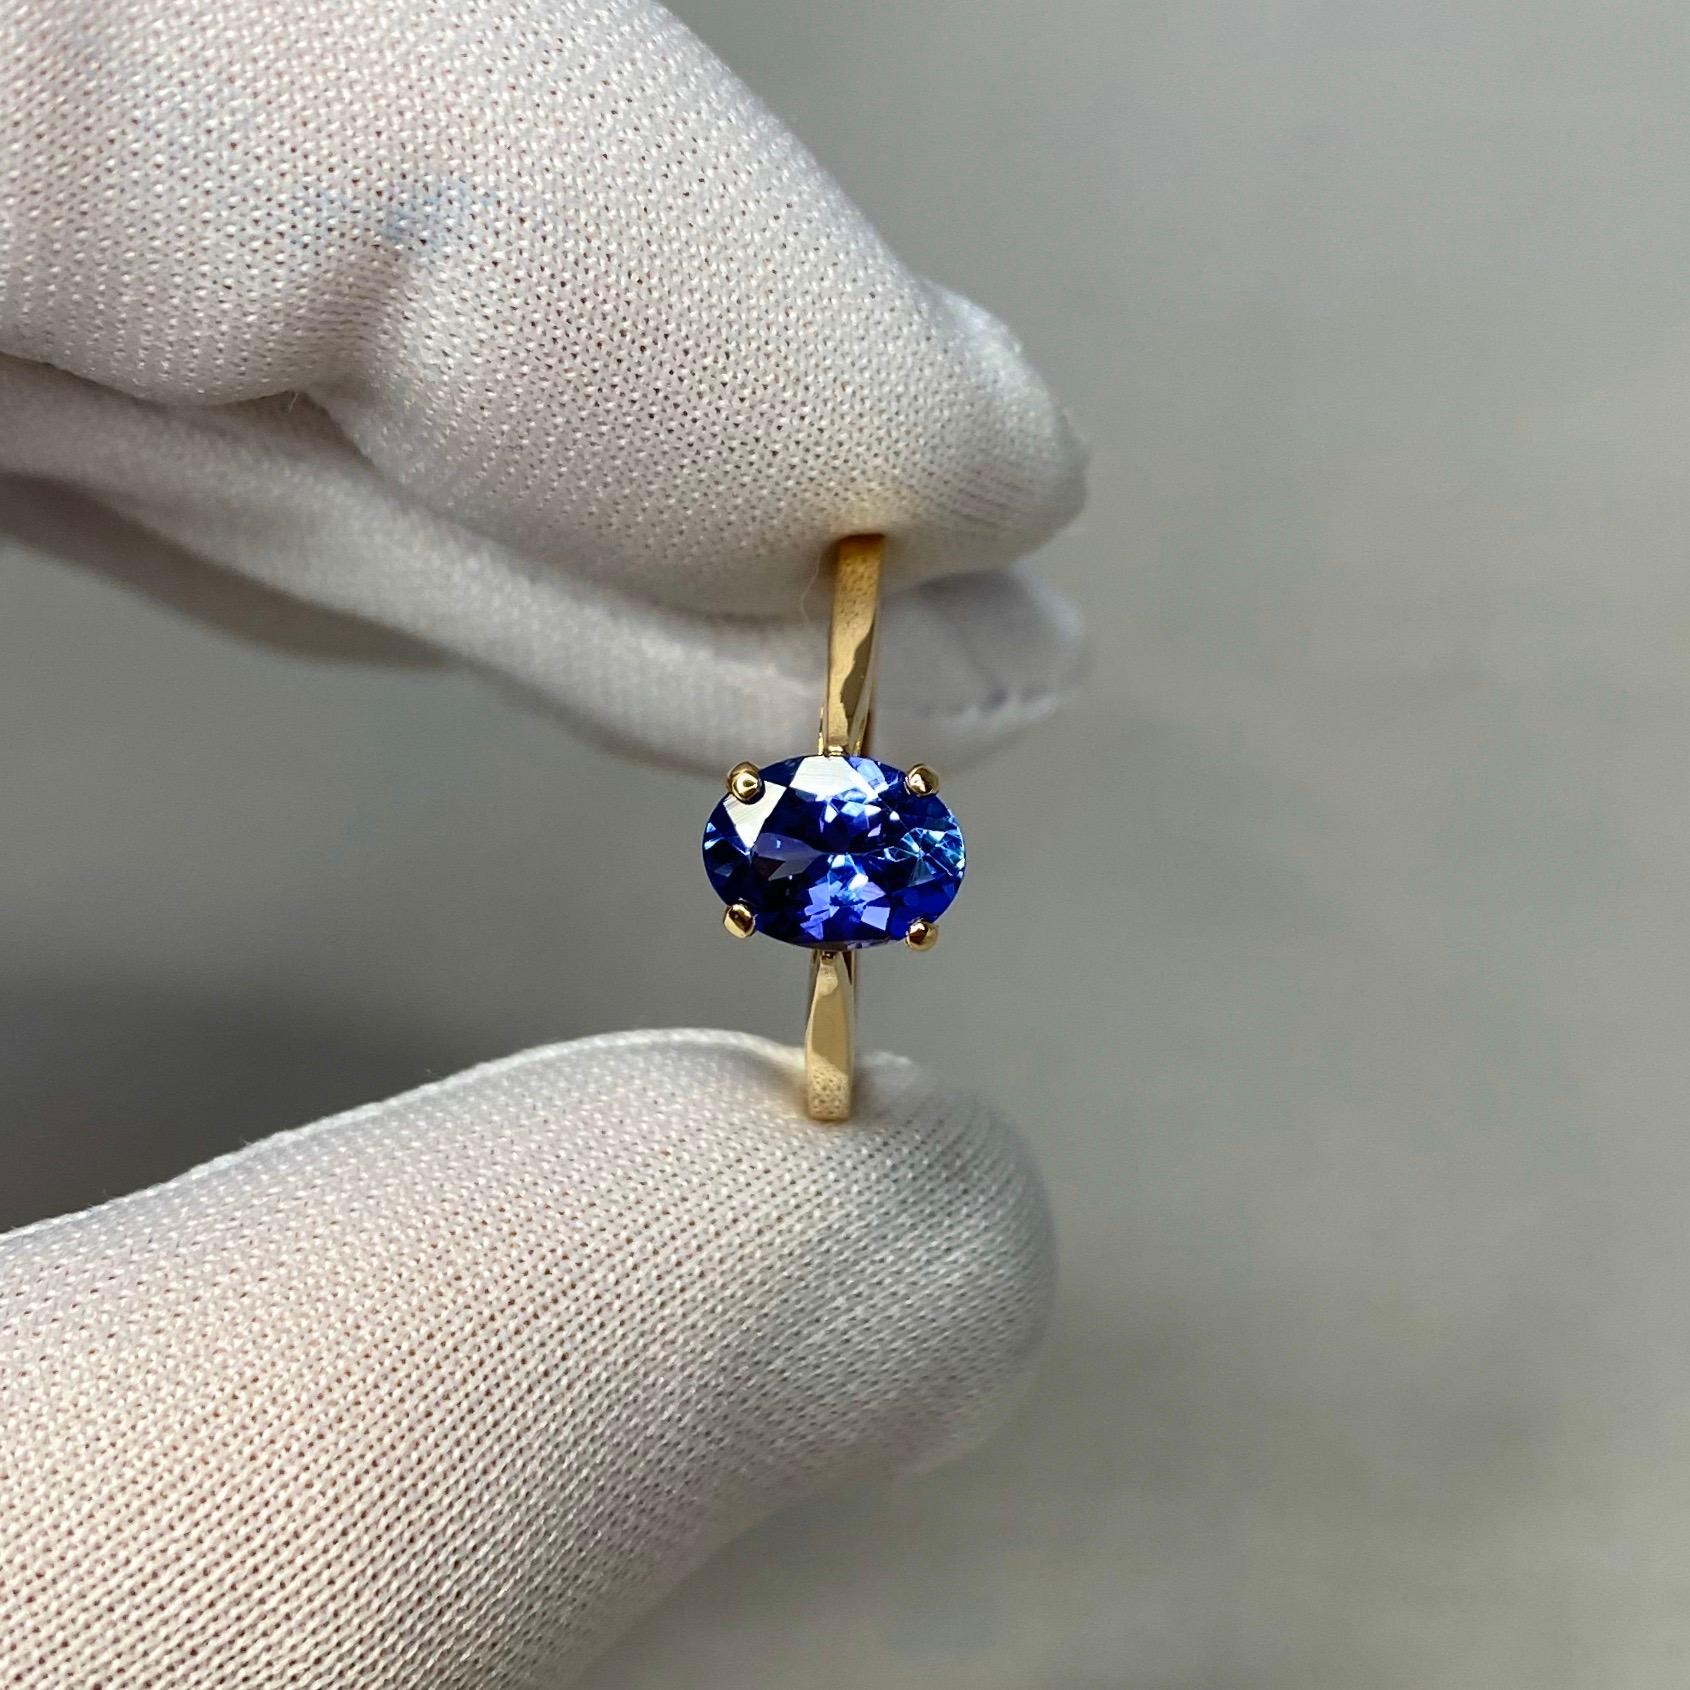 Fine natural vivid blue violet tanzanite set in a beautiful 14k yellow gold solitaire ring.

1.34 carat stone with stunning vivid blue violet colour and very good clarity. A very clean stone with only some small natural inclusions visible when